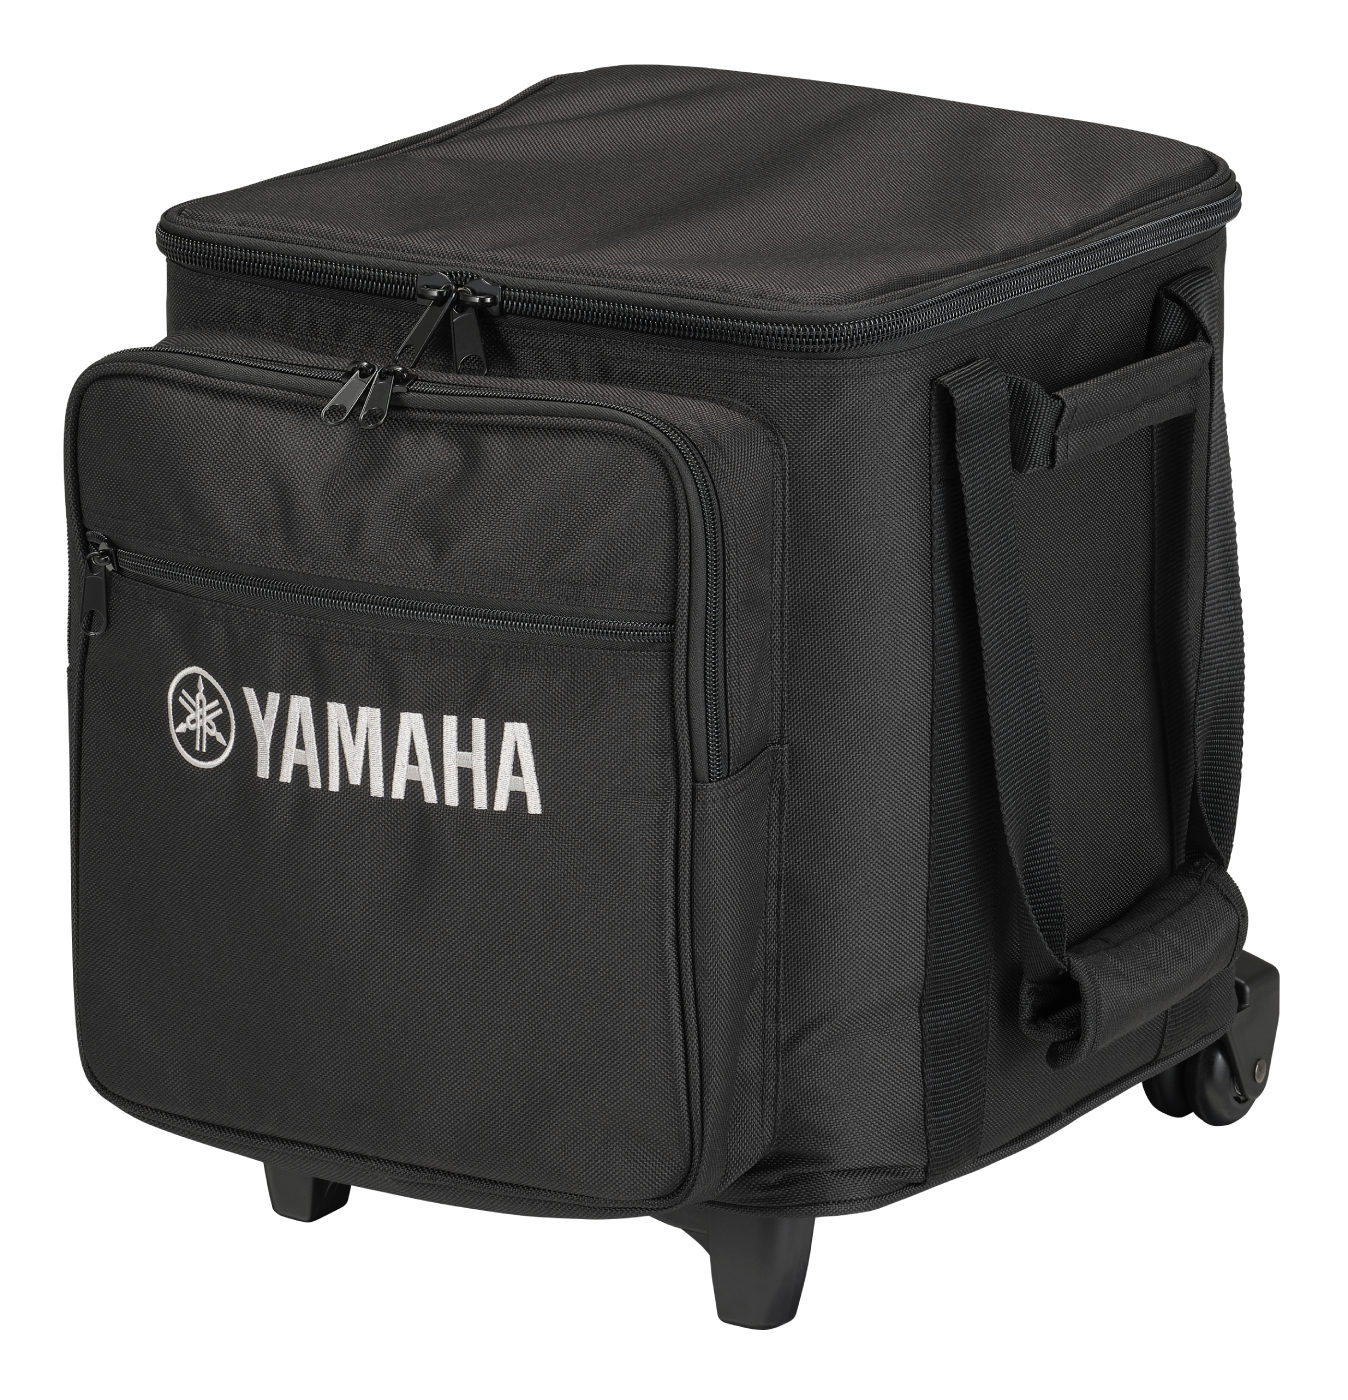 Yamaha Stagepas 200  + Valise Pour Stagepas 200 - Pack sonorización - Variation 2